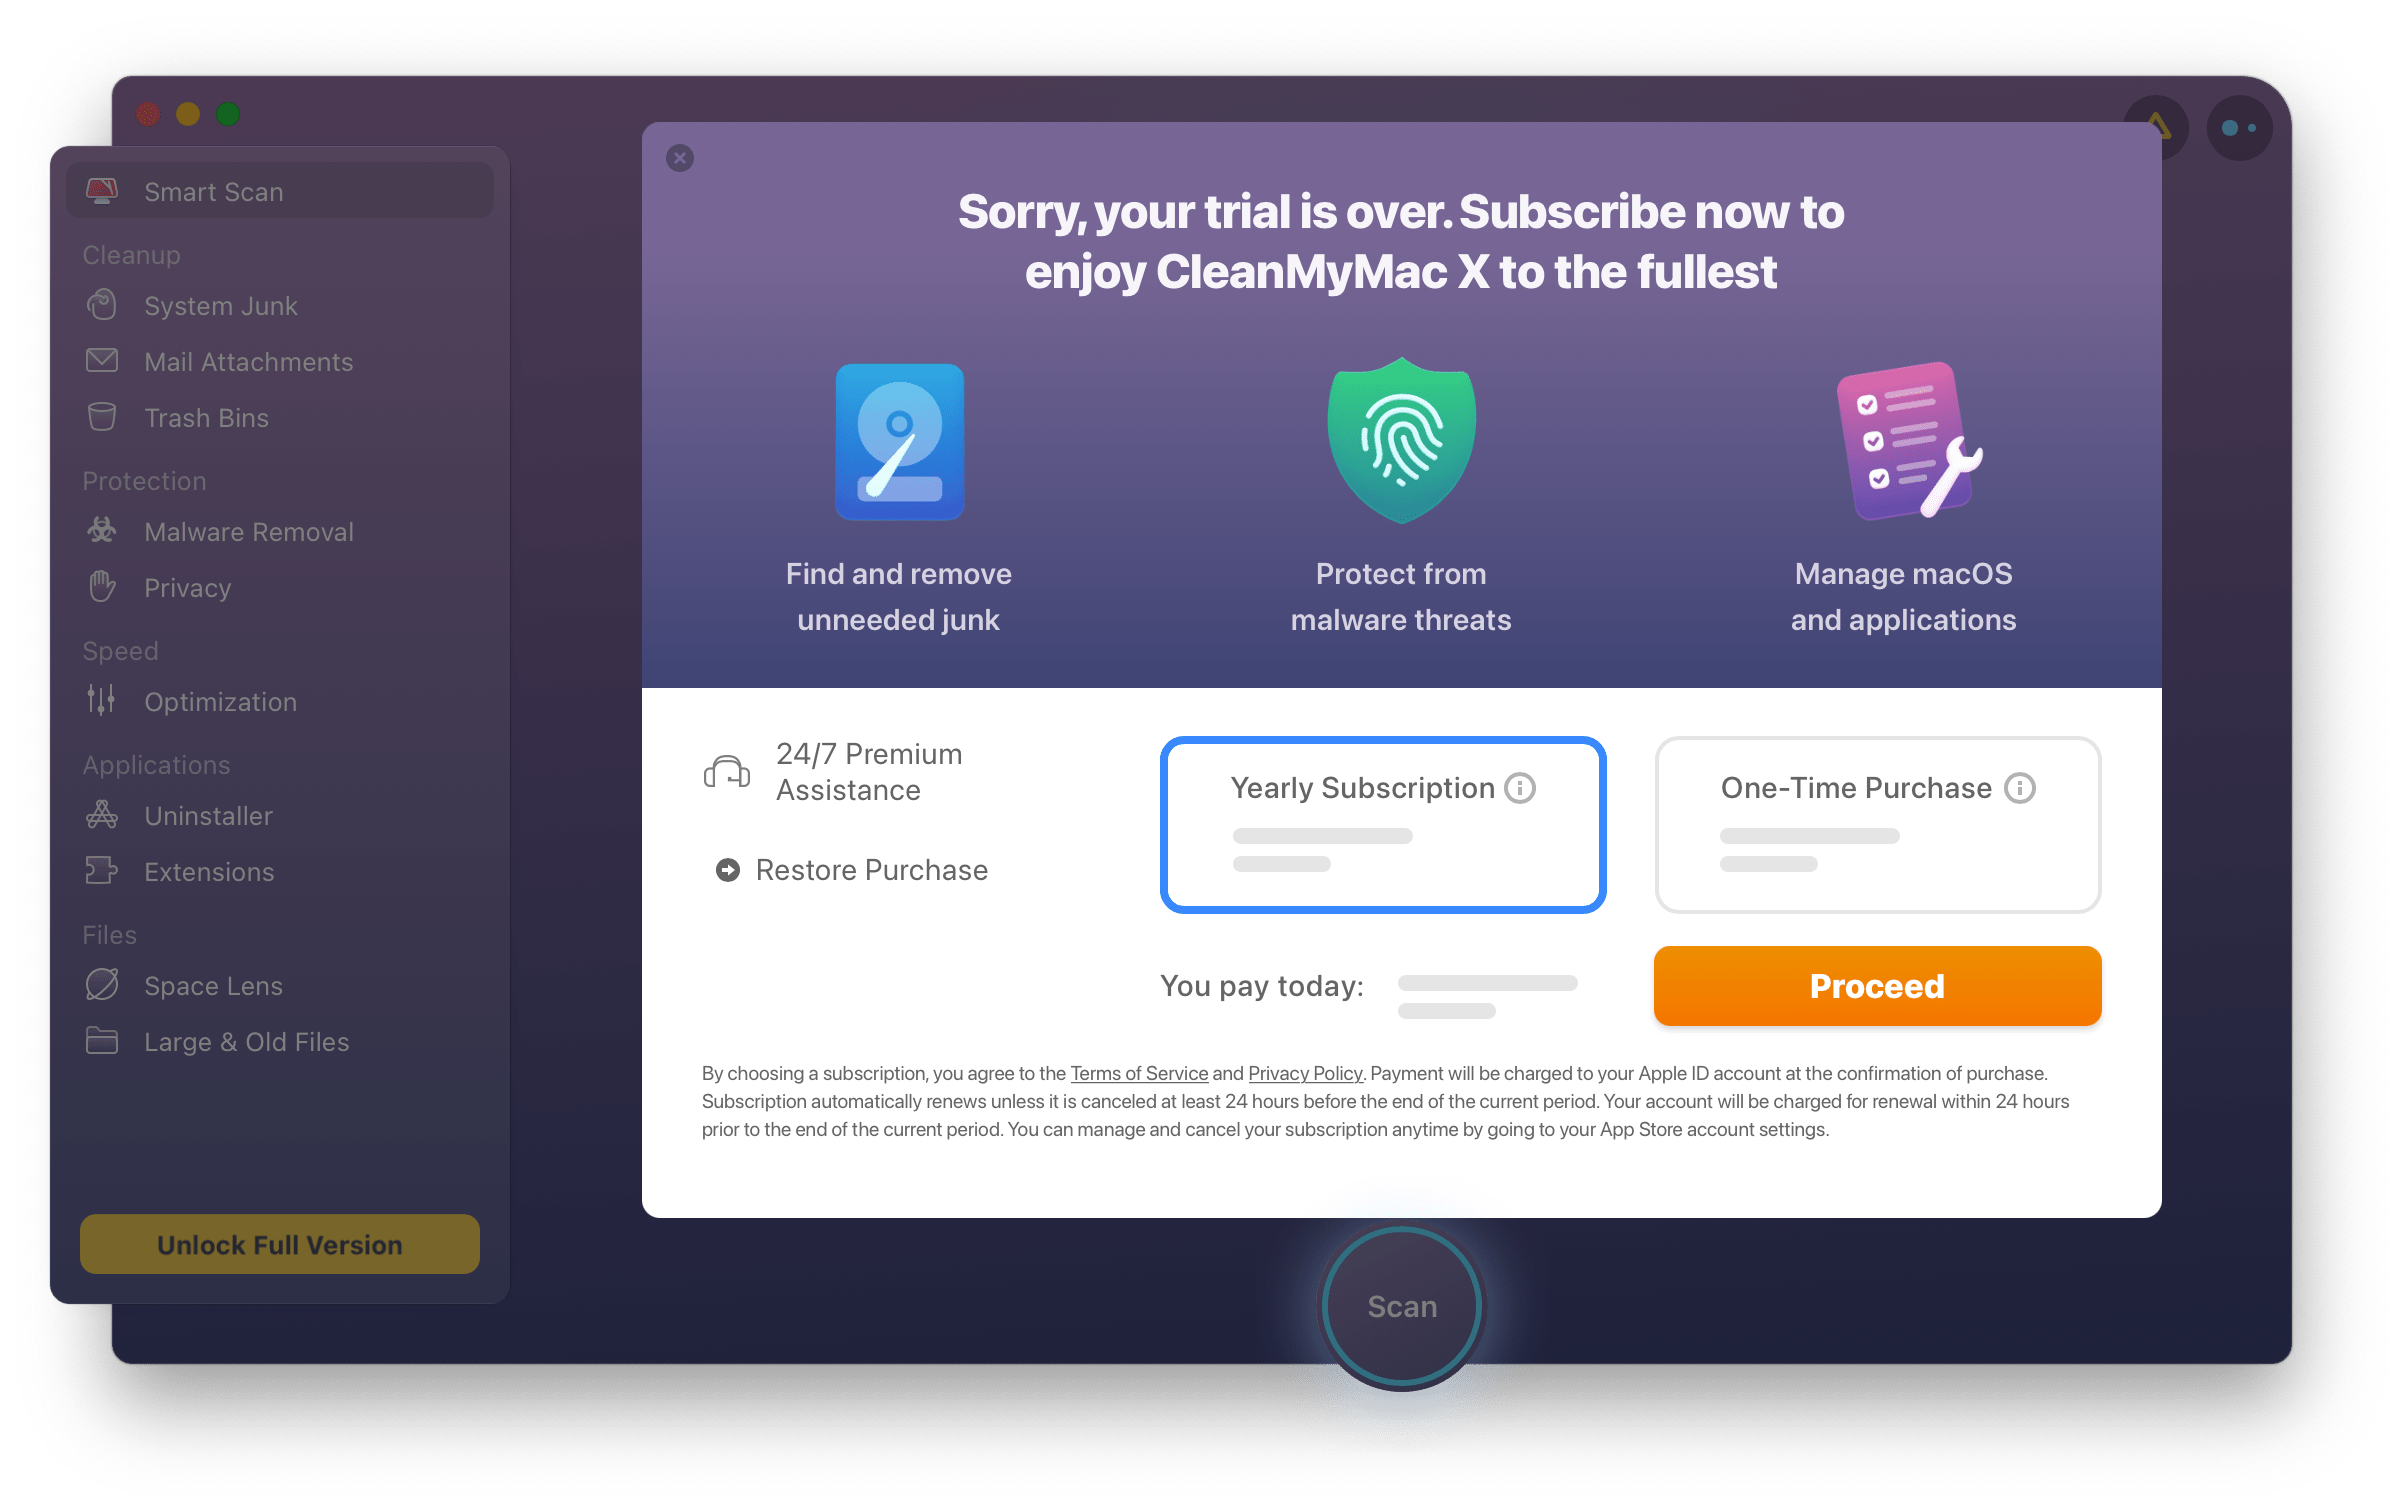 cleanmymac 3 activation number 2018